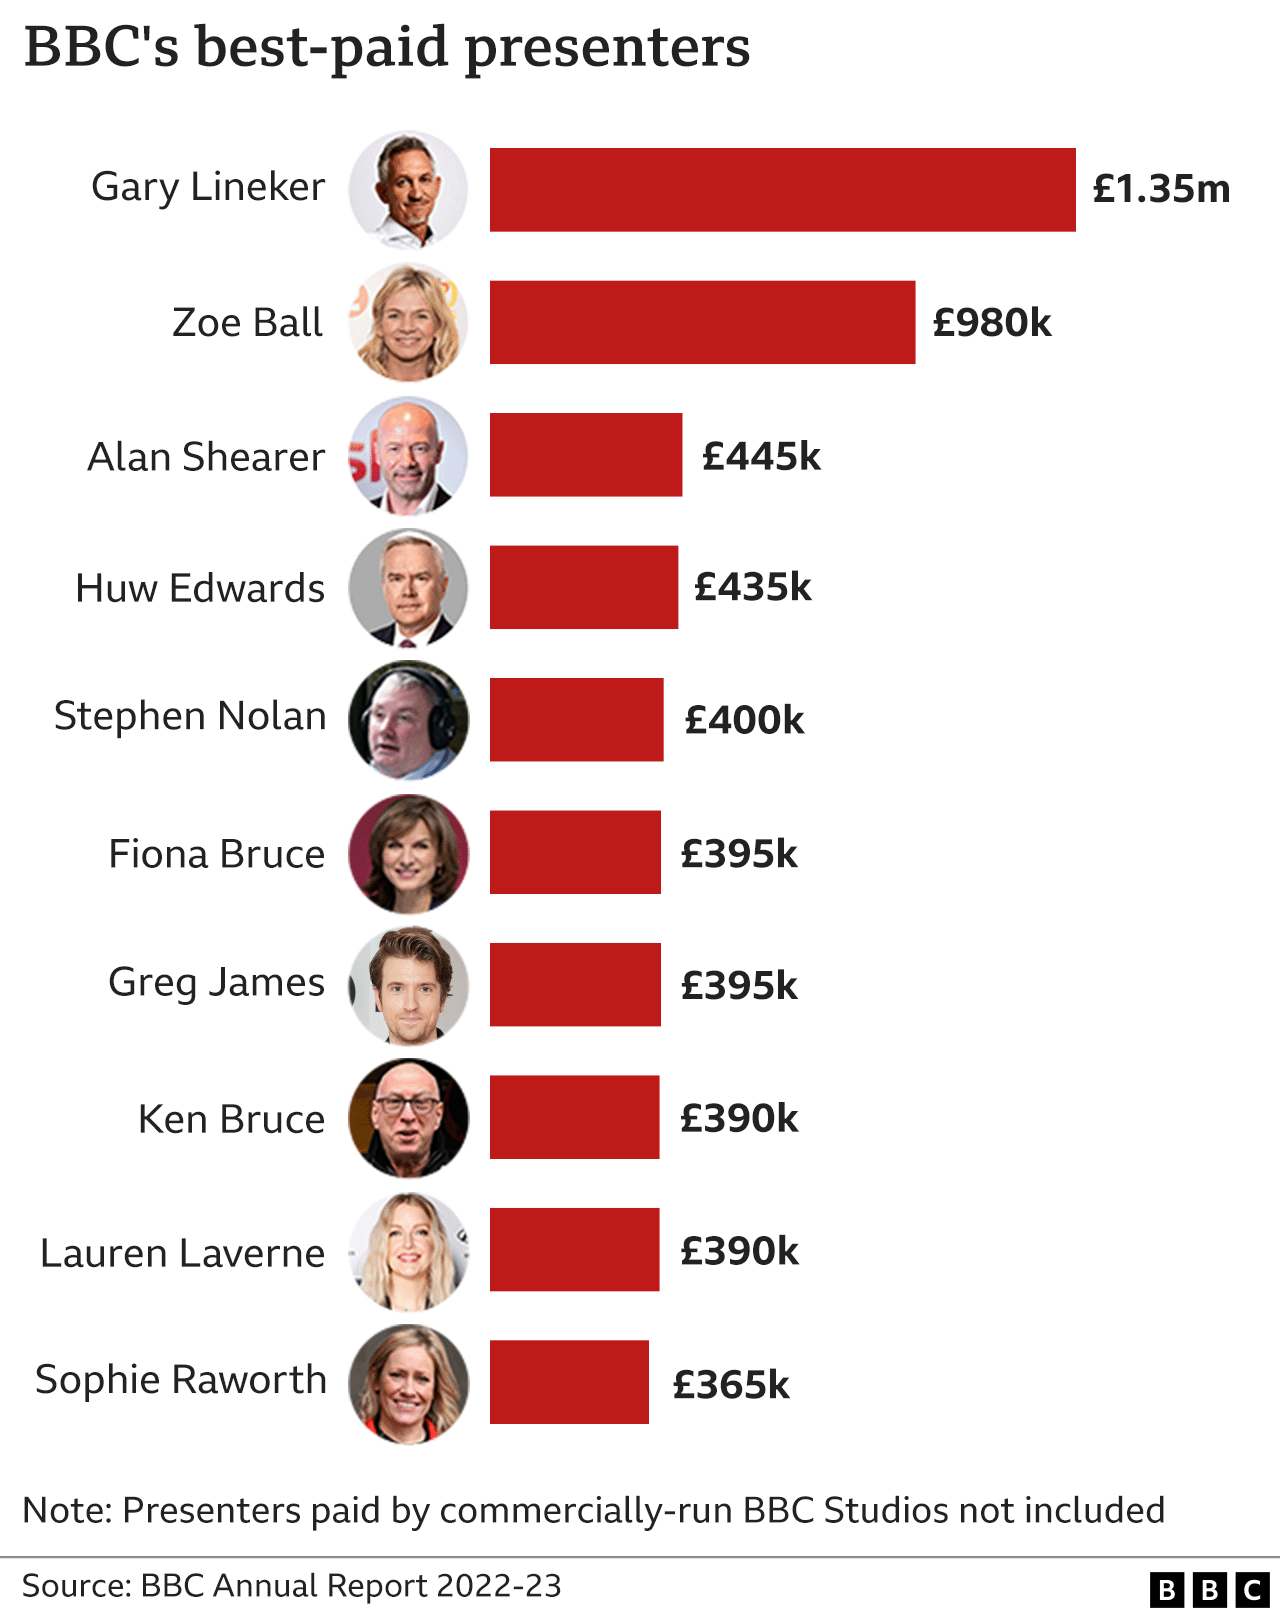 Graphic showing the 10 best-paid BBC presenters in 2022-23 according to the BBC's Annual Report (which does not include those paid by the commercially run BBC Studios). They were Gary Lineker on 1.35m, Zoe Ball £980k, Alan Shearer £445k, Huw Edwards £435k, Stephen Nolan £400k, Fiona Bruce £395k, Greg James £395k, Ken Bruce £390k, Lauren Laverne £390k, and Sophie Raworth £365k